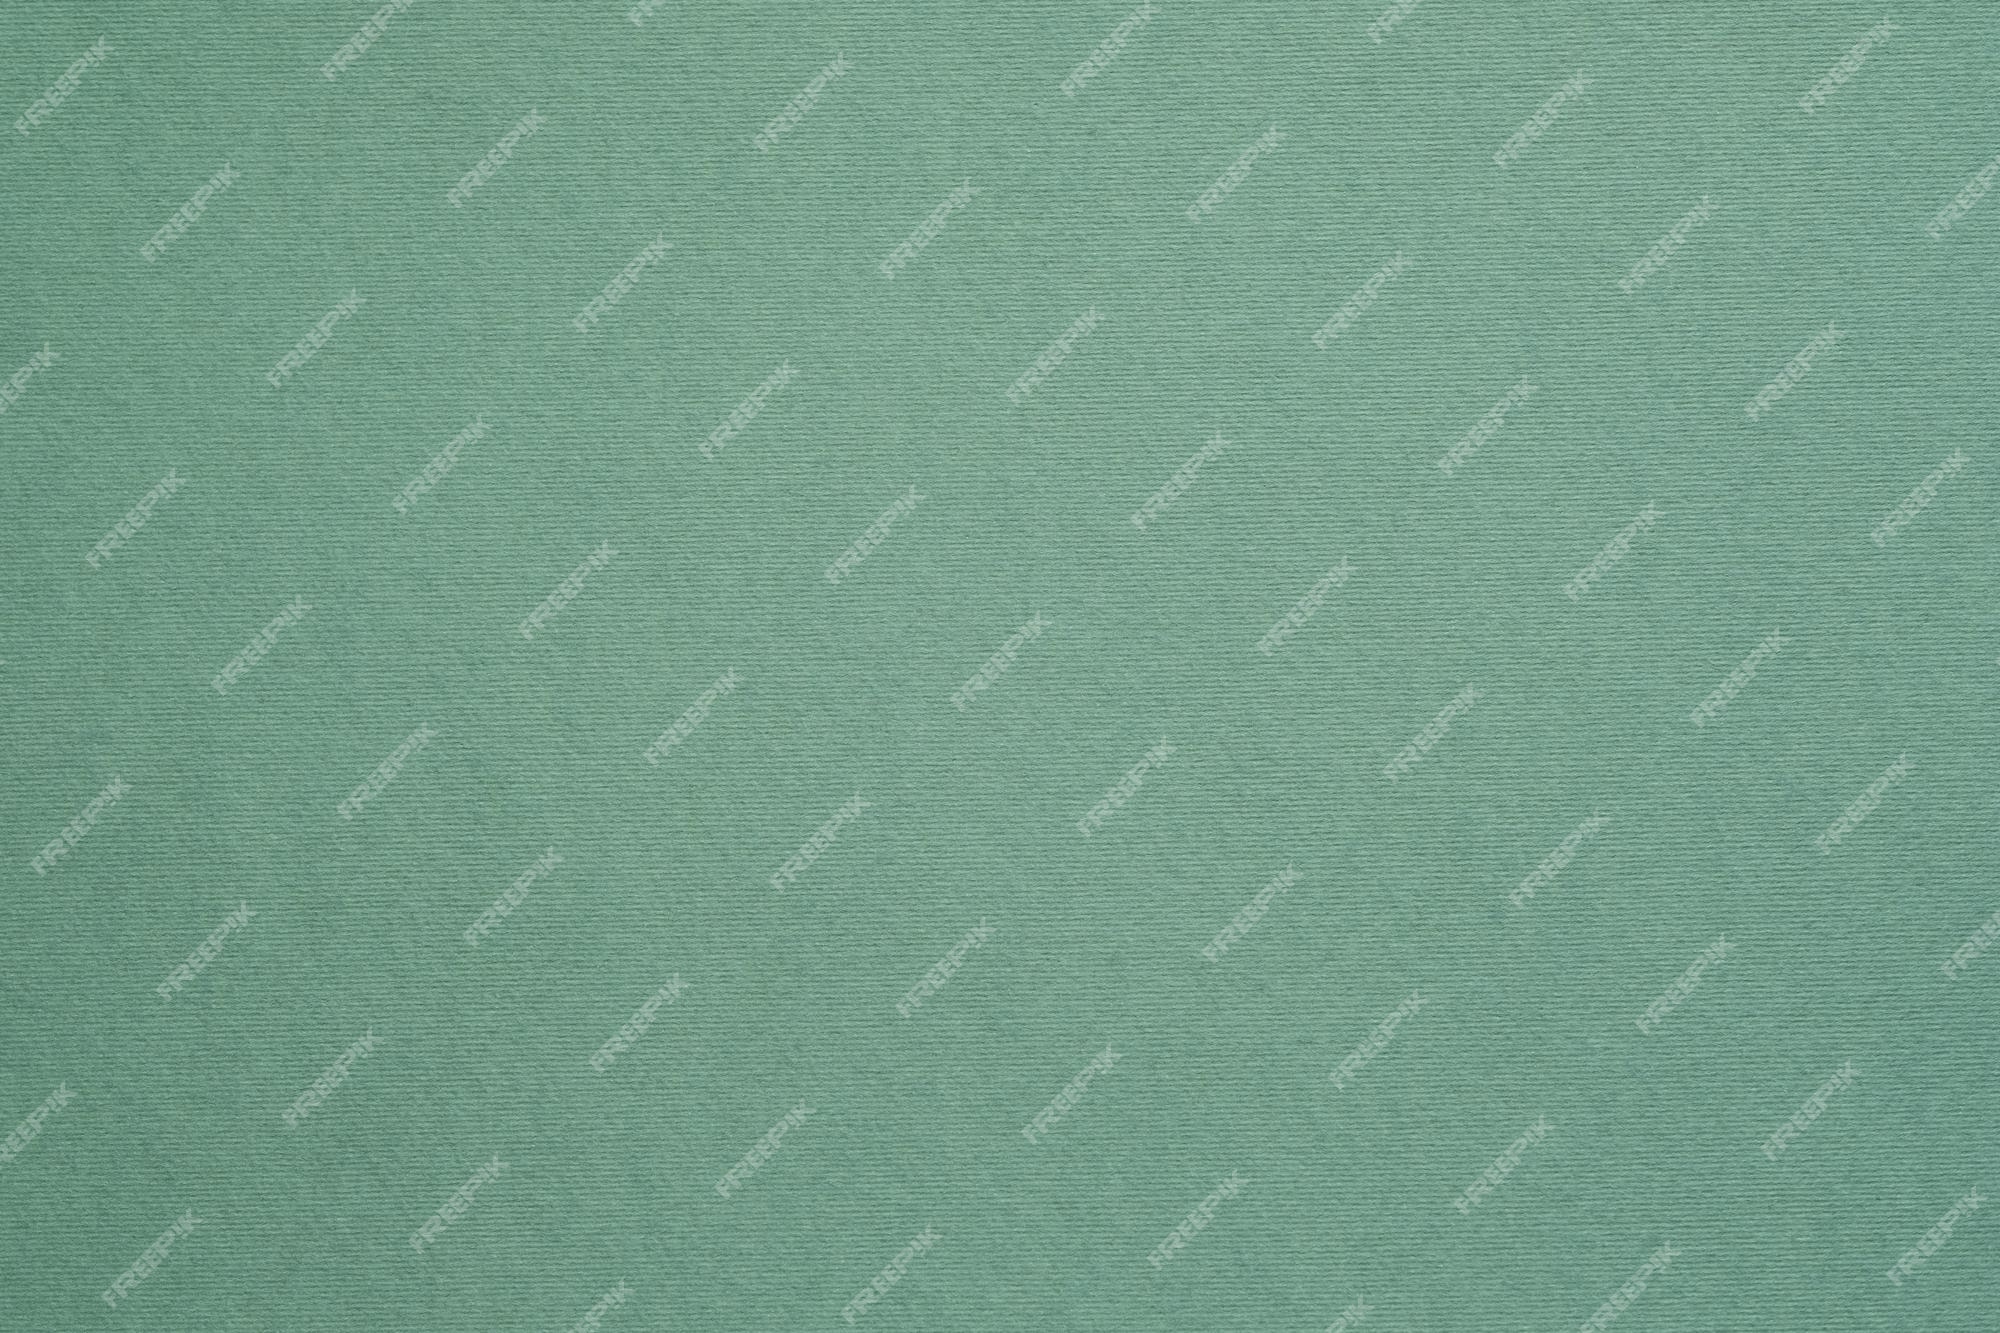 Premium Photo | Dark sage green felt texture abstract art background  colored construction paper surface empty space